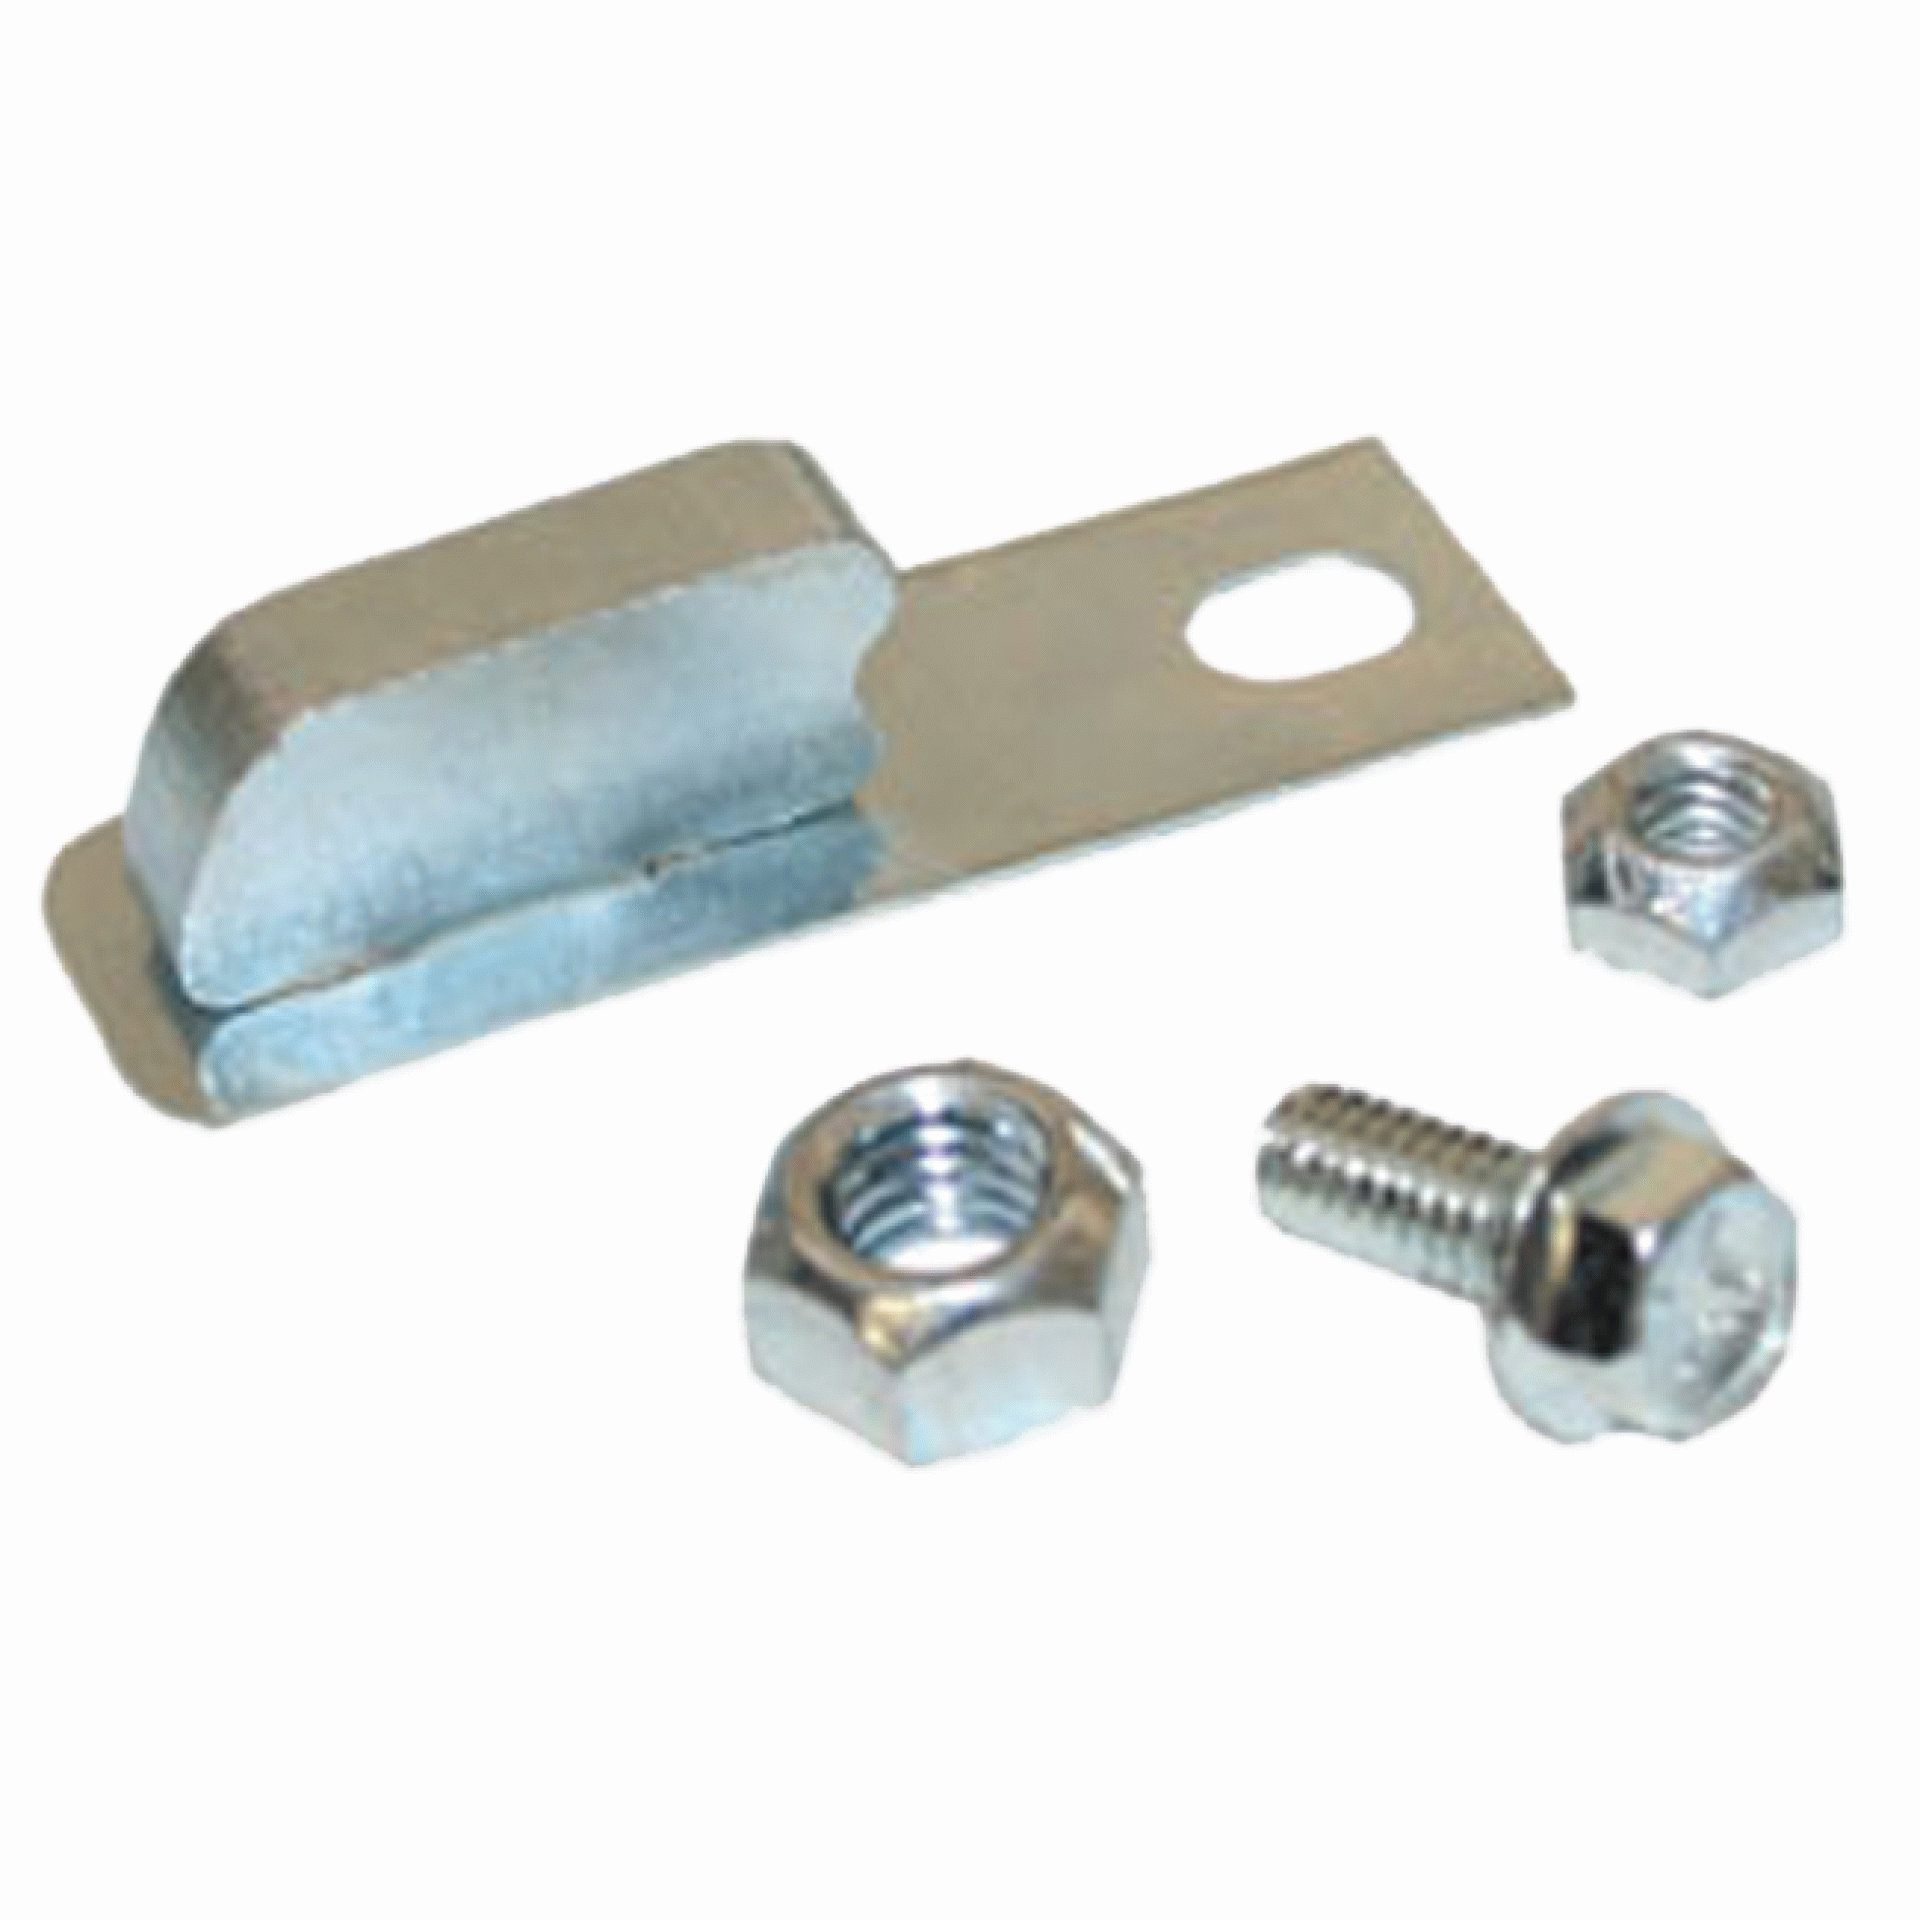 Lippert / Atwood | 671456 | STOP & SPRING ASSEMBLY REPLACEMENT KIT- KIT INCLUDES: 9 11 14 AND 24